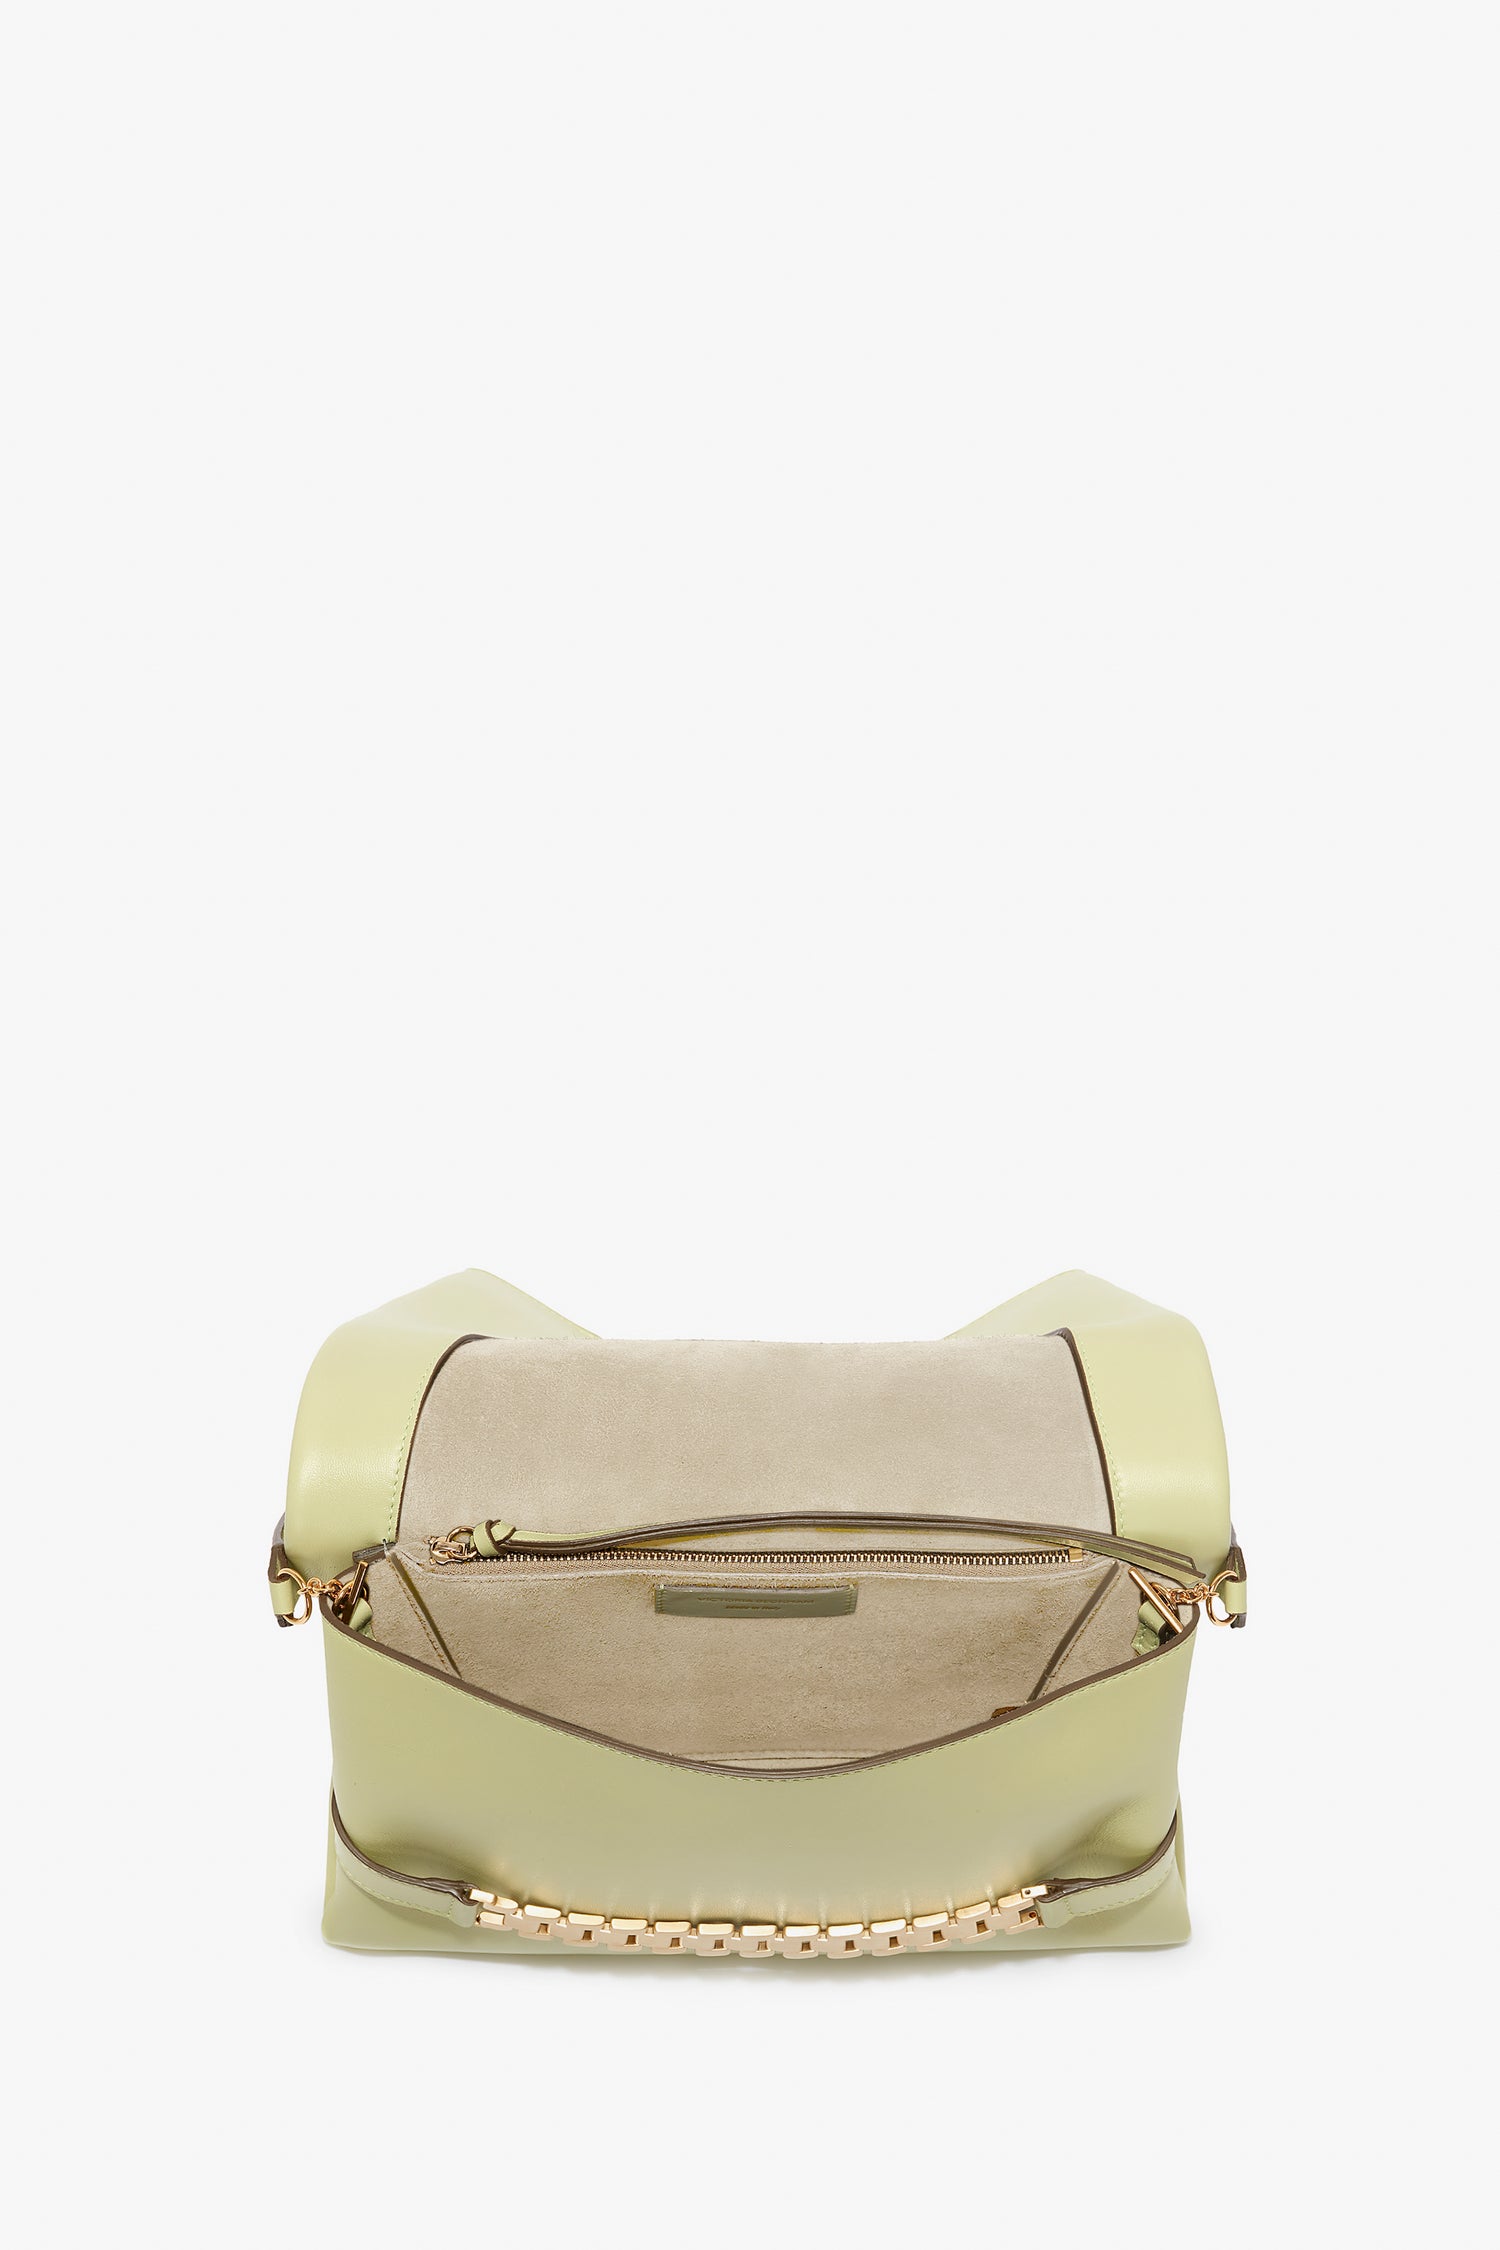 Light green Victoria Beckham designer handbag with gold chain detail and a front zipper, displayed against a white background.